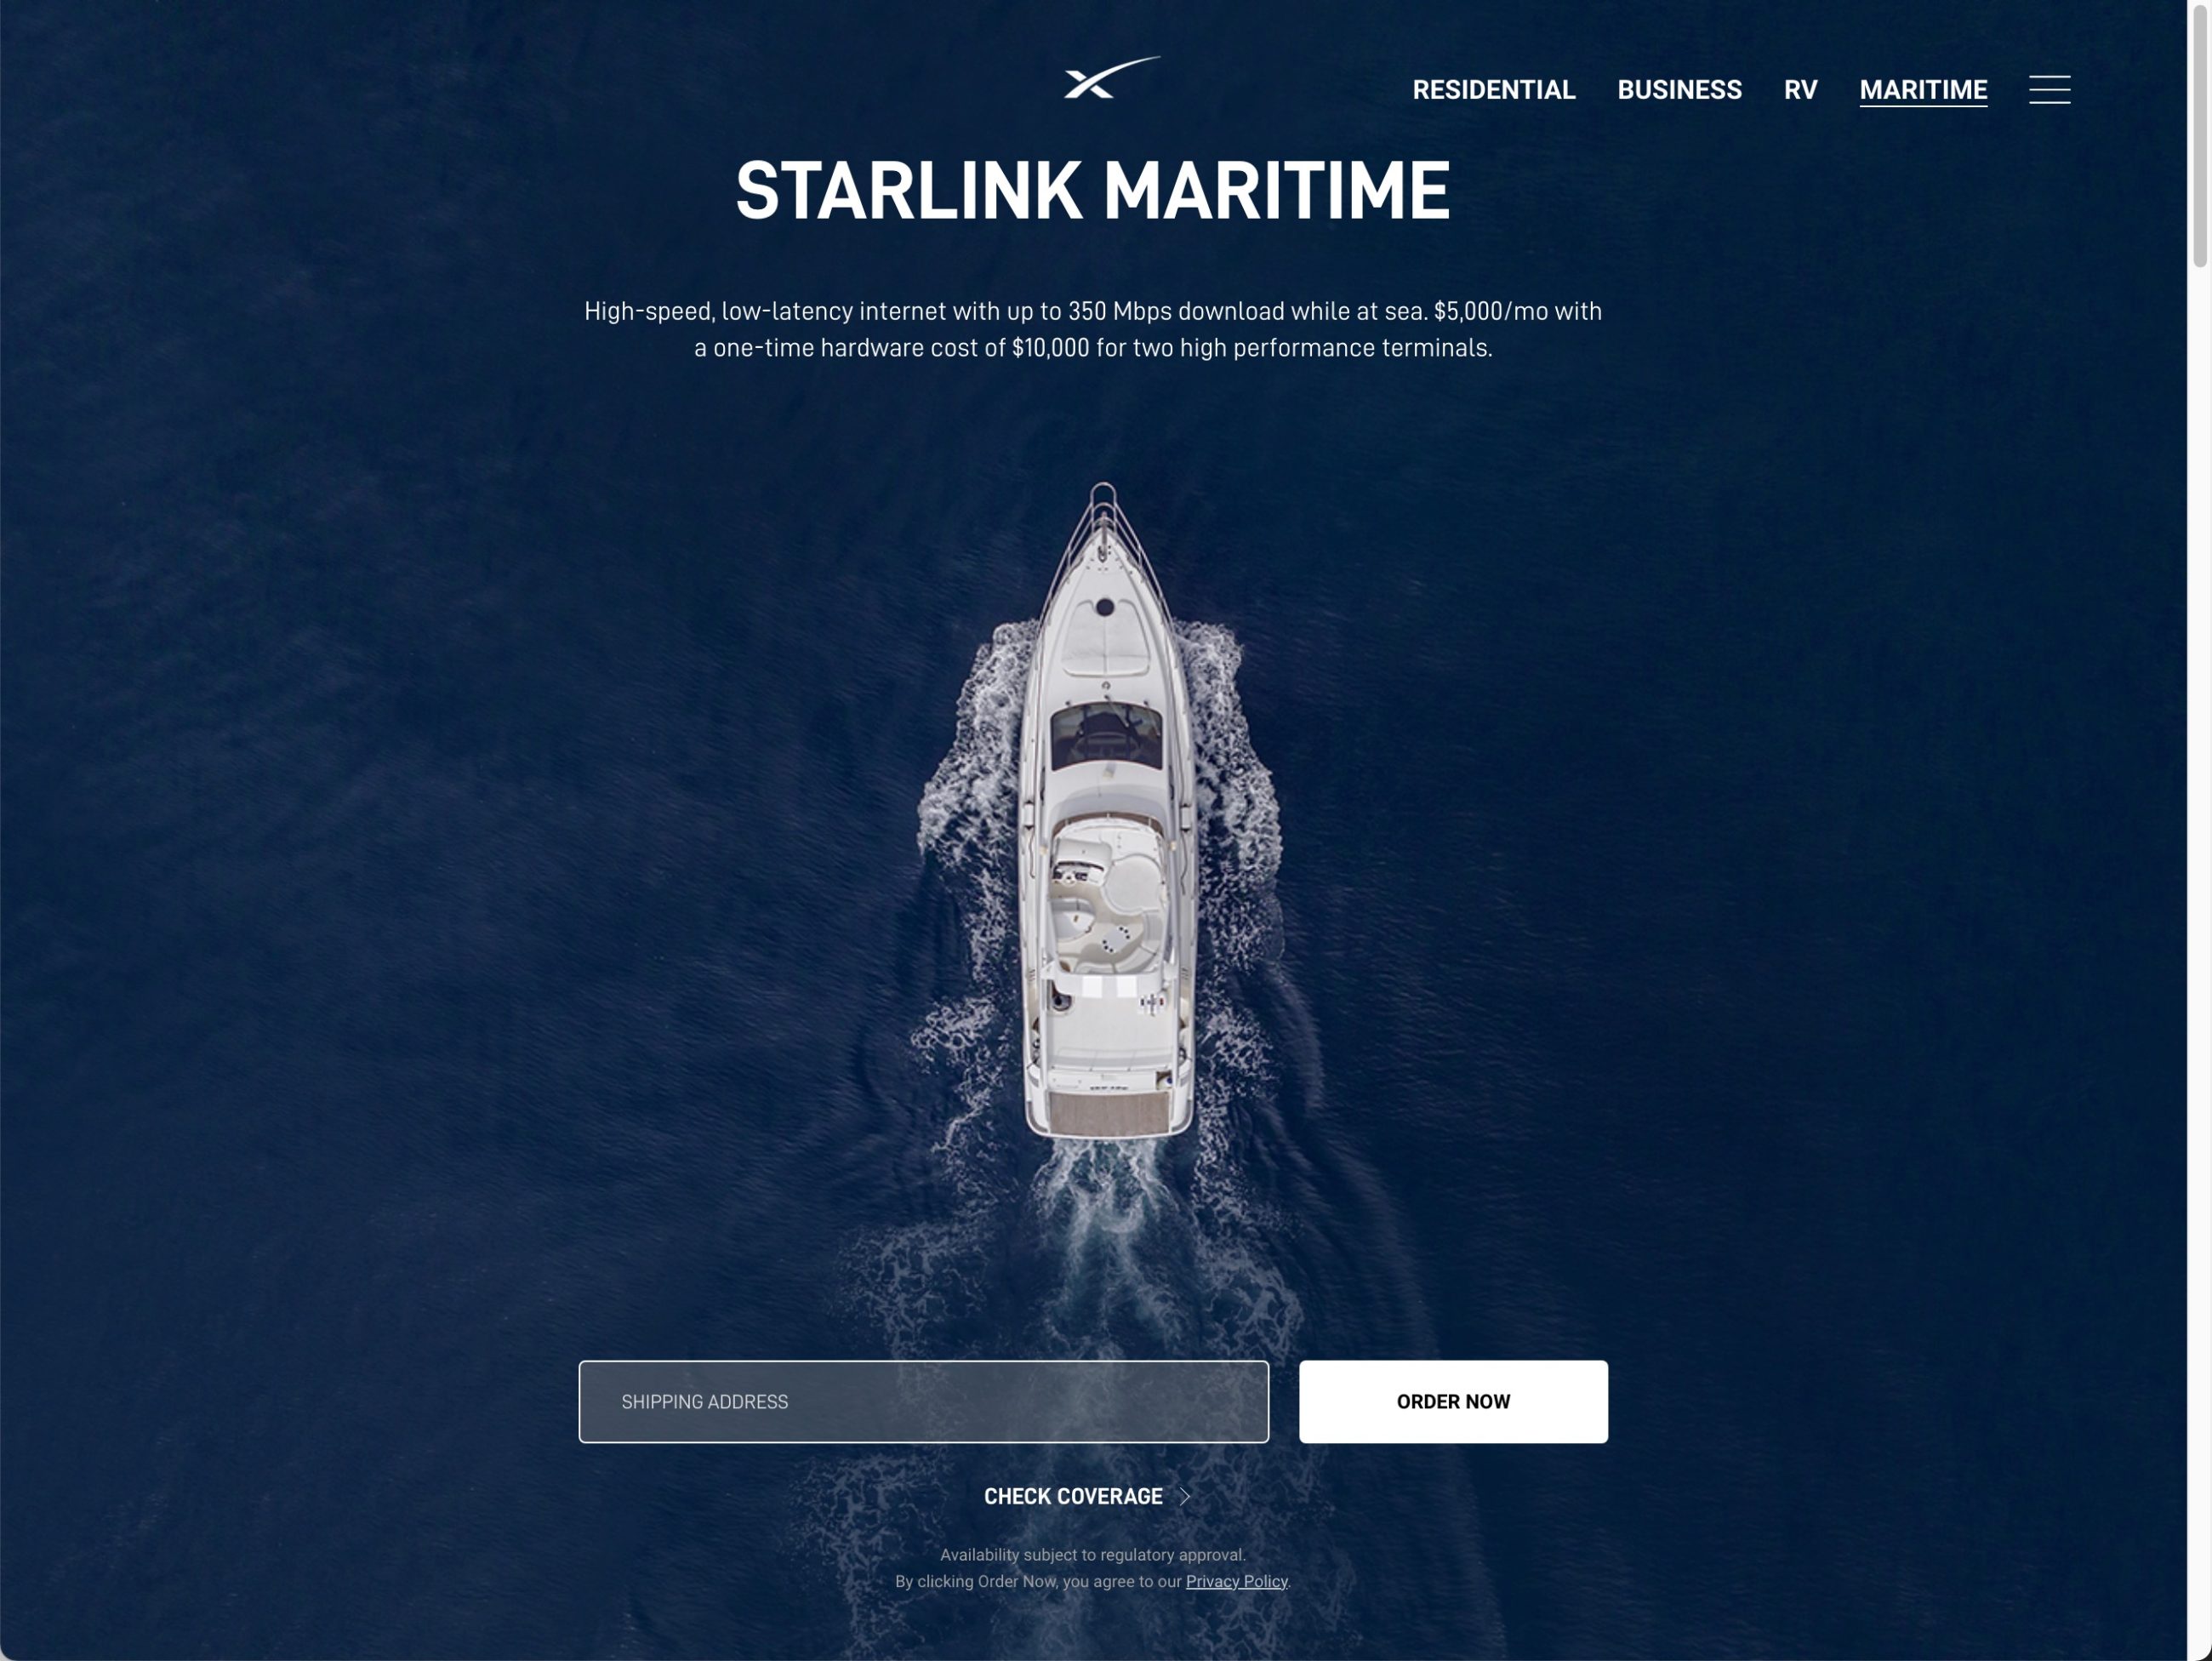 starlink-offers-new-services-aimed-at-rv-and-marine-use-panbo